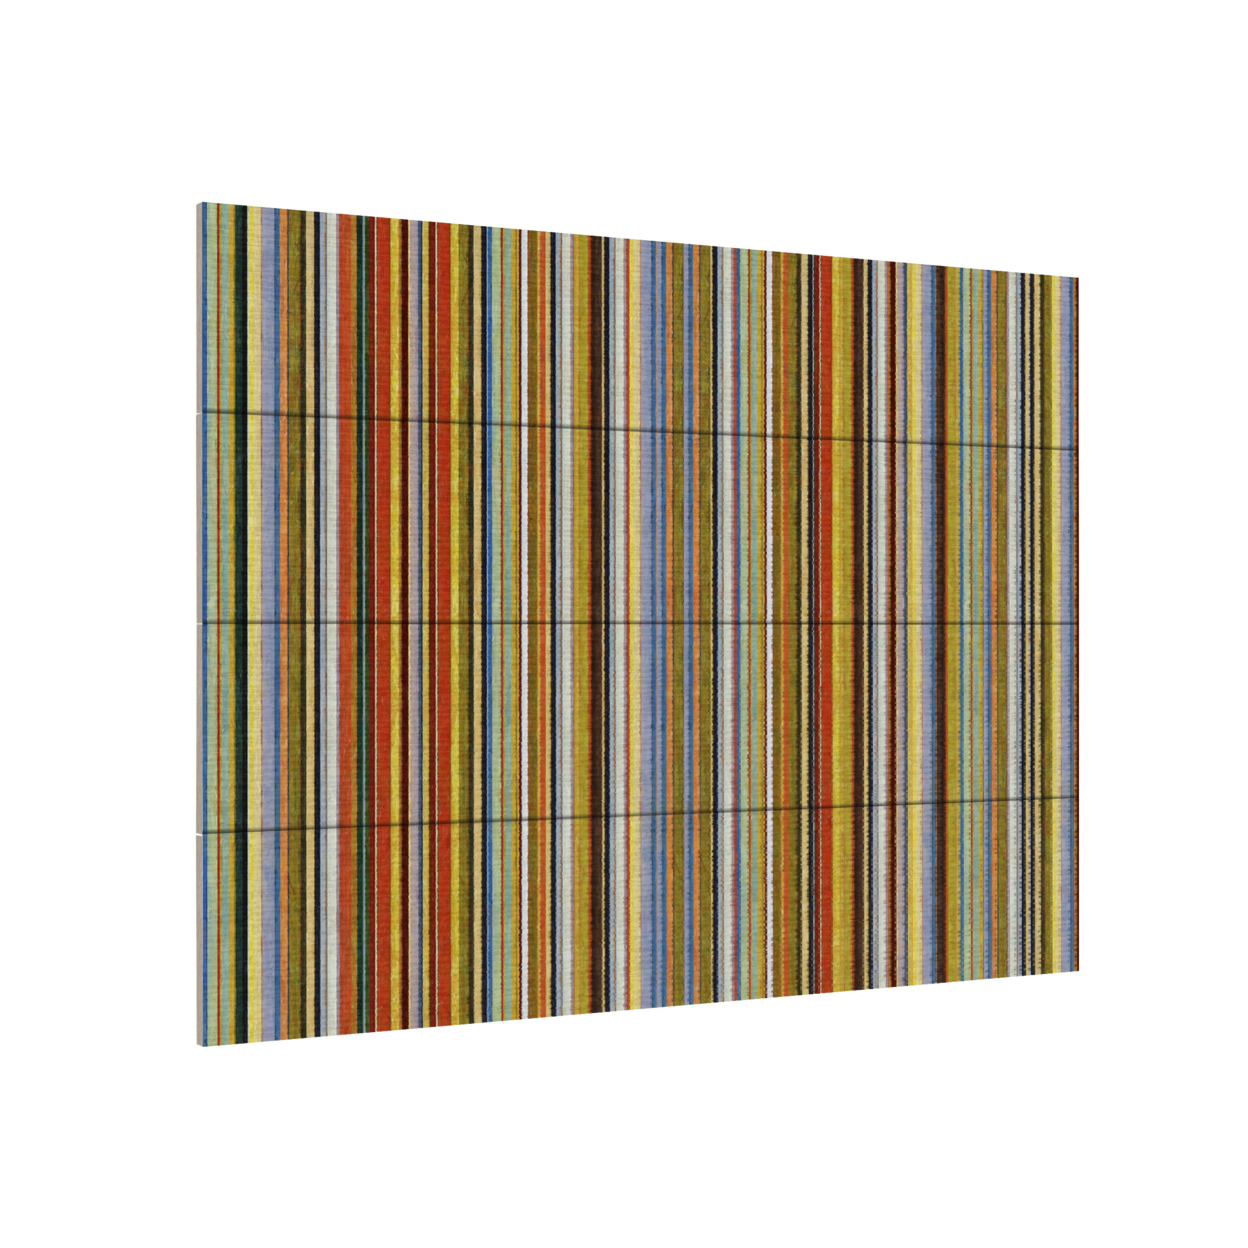 Wall Art 12 X 16 Inches Titled Comfortable Stripes VII Ready To Hang Printed On Wooden Planks